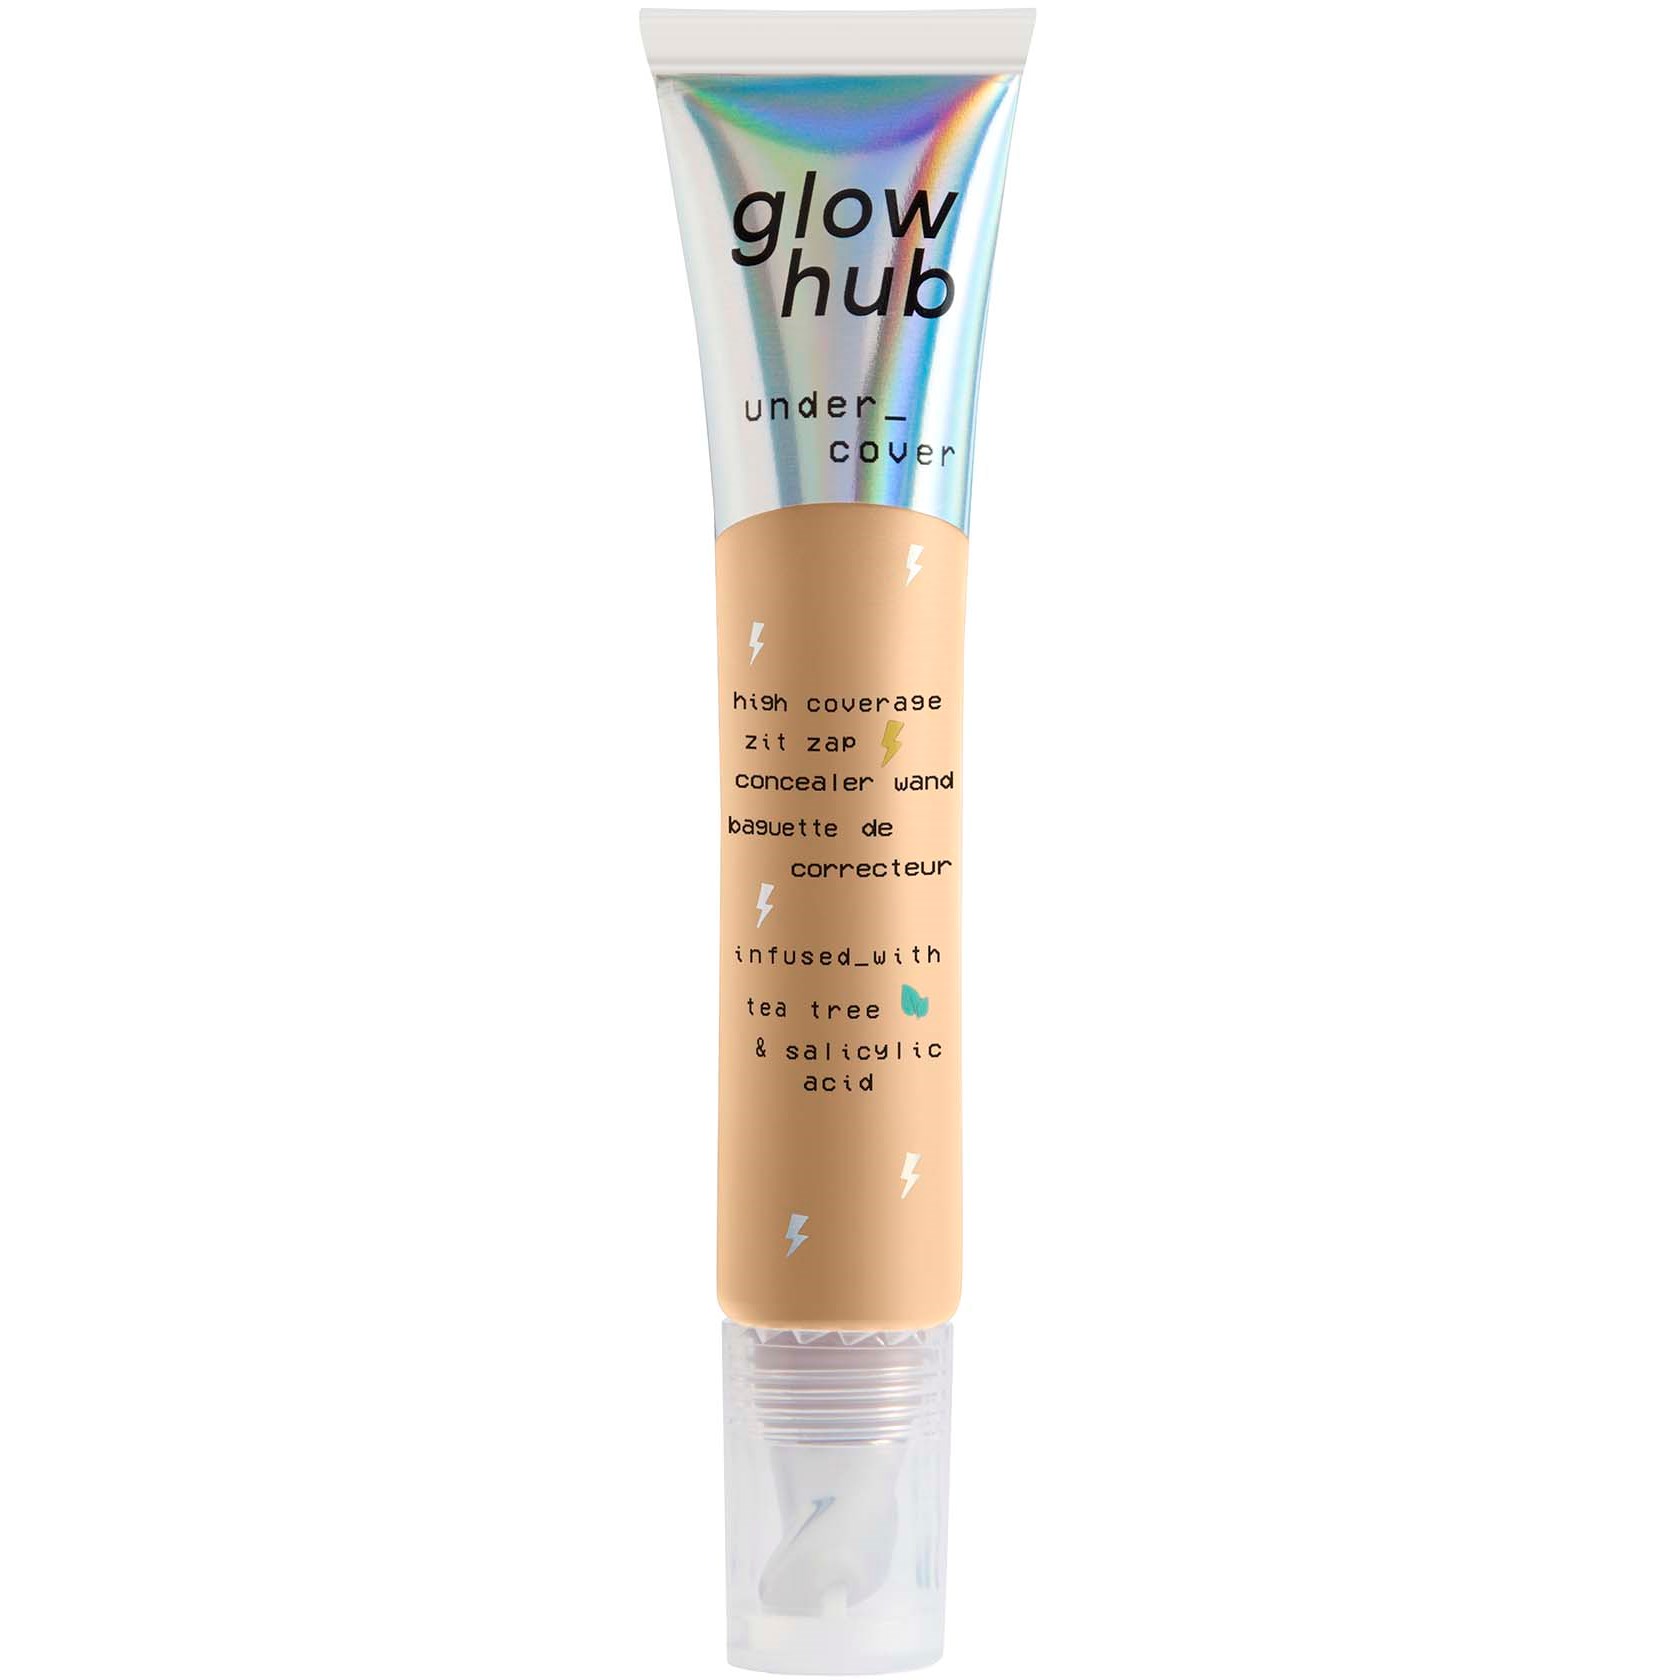 Glow Hub Under Cover High Coverage Zit Zap Concealer Wand 07W Aamani